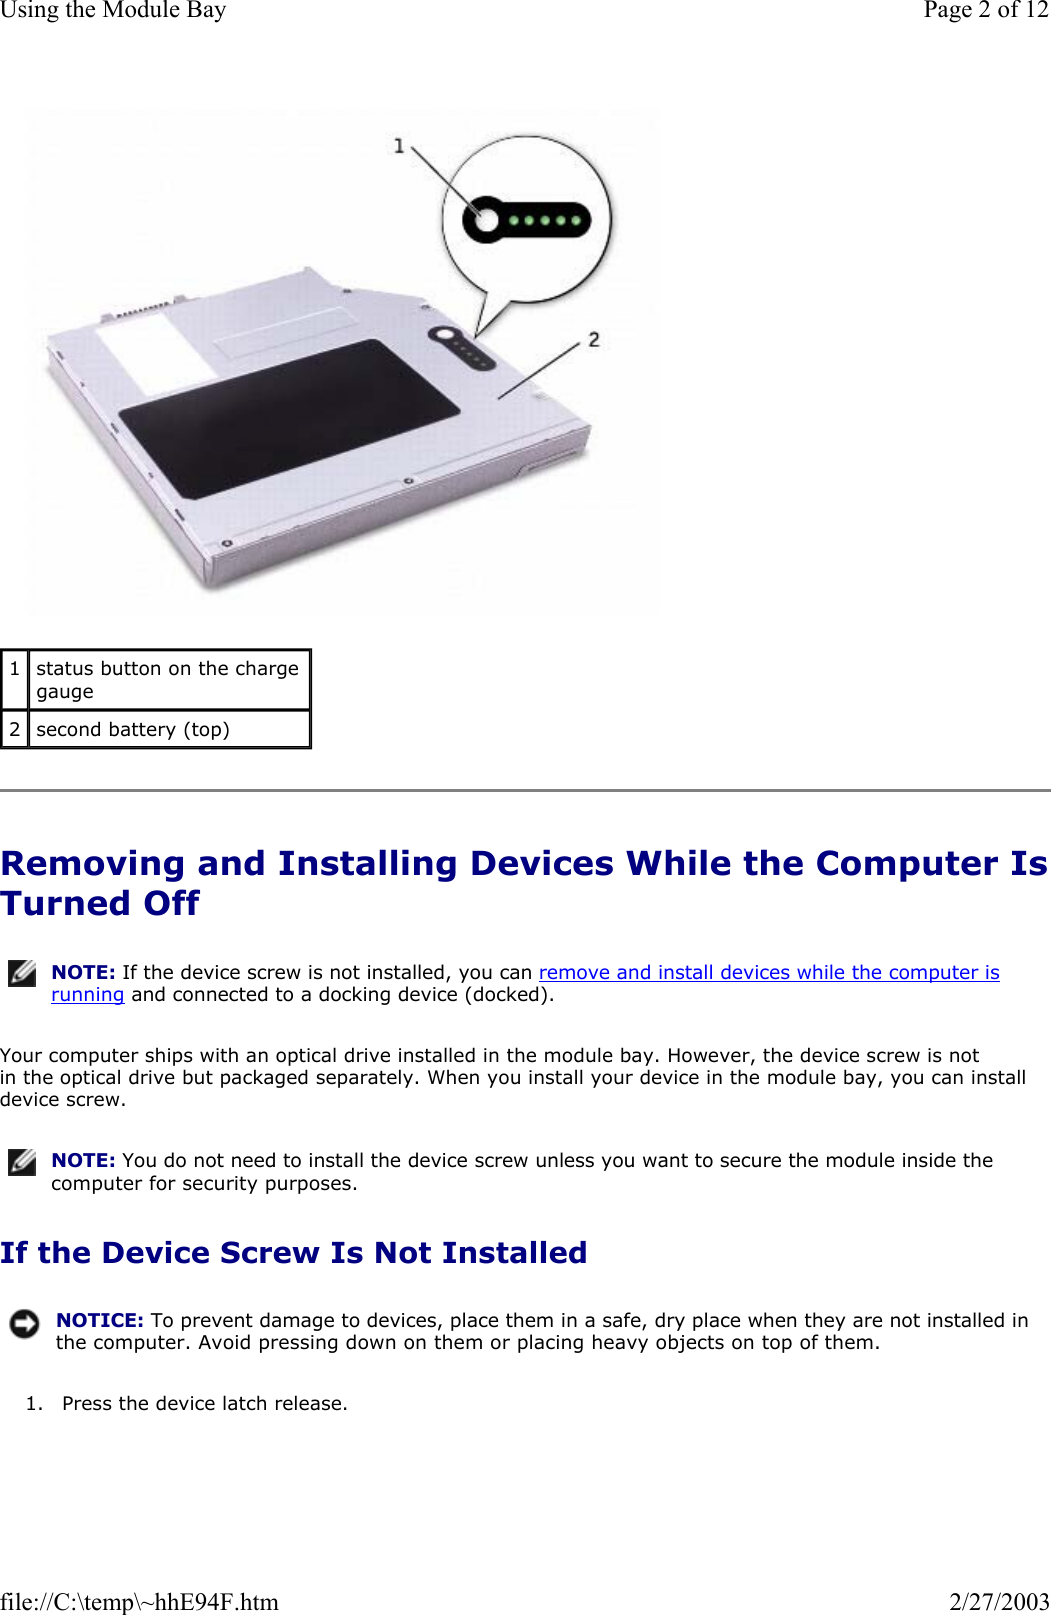   Removing and Installing Devices While the Computer IsTurned Off Your computer ships with an optical drive installed in the module bay. However, the device screw is not in the optical drive but packaged separately. When you install your device in the module bay, you can install device screw. If the Device Screw Is Not Installed 1. Press the device latch release.  1  status button on the charge gauge 2  second battery (top) NOTE: If the device screw is not installed, you can remove and install devices while the computer is running and connected to a docking device (docked).NOTE: You do not need to install the device screw unless you want to secure the module inside the computer for security purposes.NOTICE: To prevent damage to devices, place them in a safe, dry place when they are not installed in the computer. Avoid pressing down on them or placing heavy objects on top of them.Page 2 of 12Using the Module Bay2/27/2003file://C:\temp\~hhE94F.htm